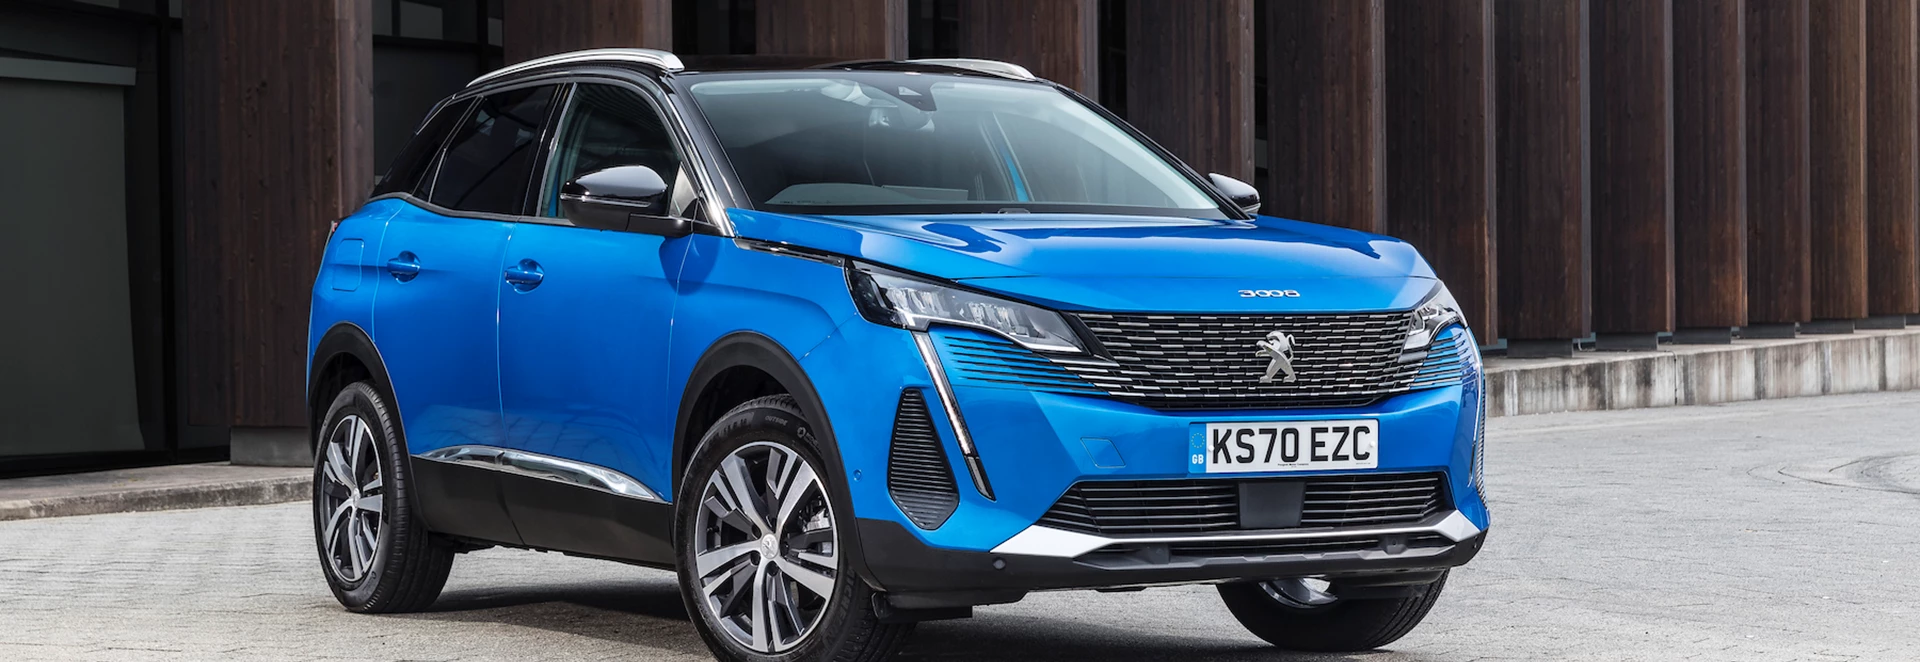 Buyer’s guide to the Peugeot 3008 